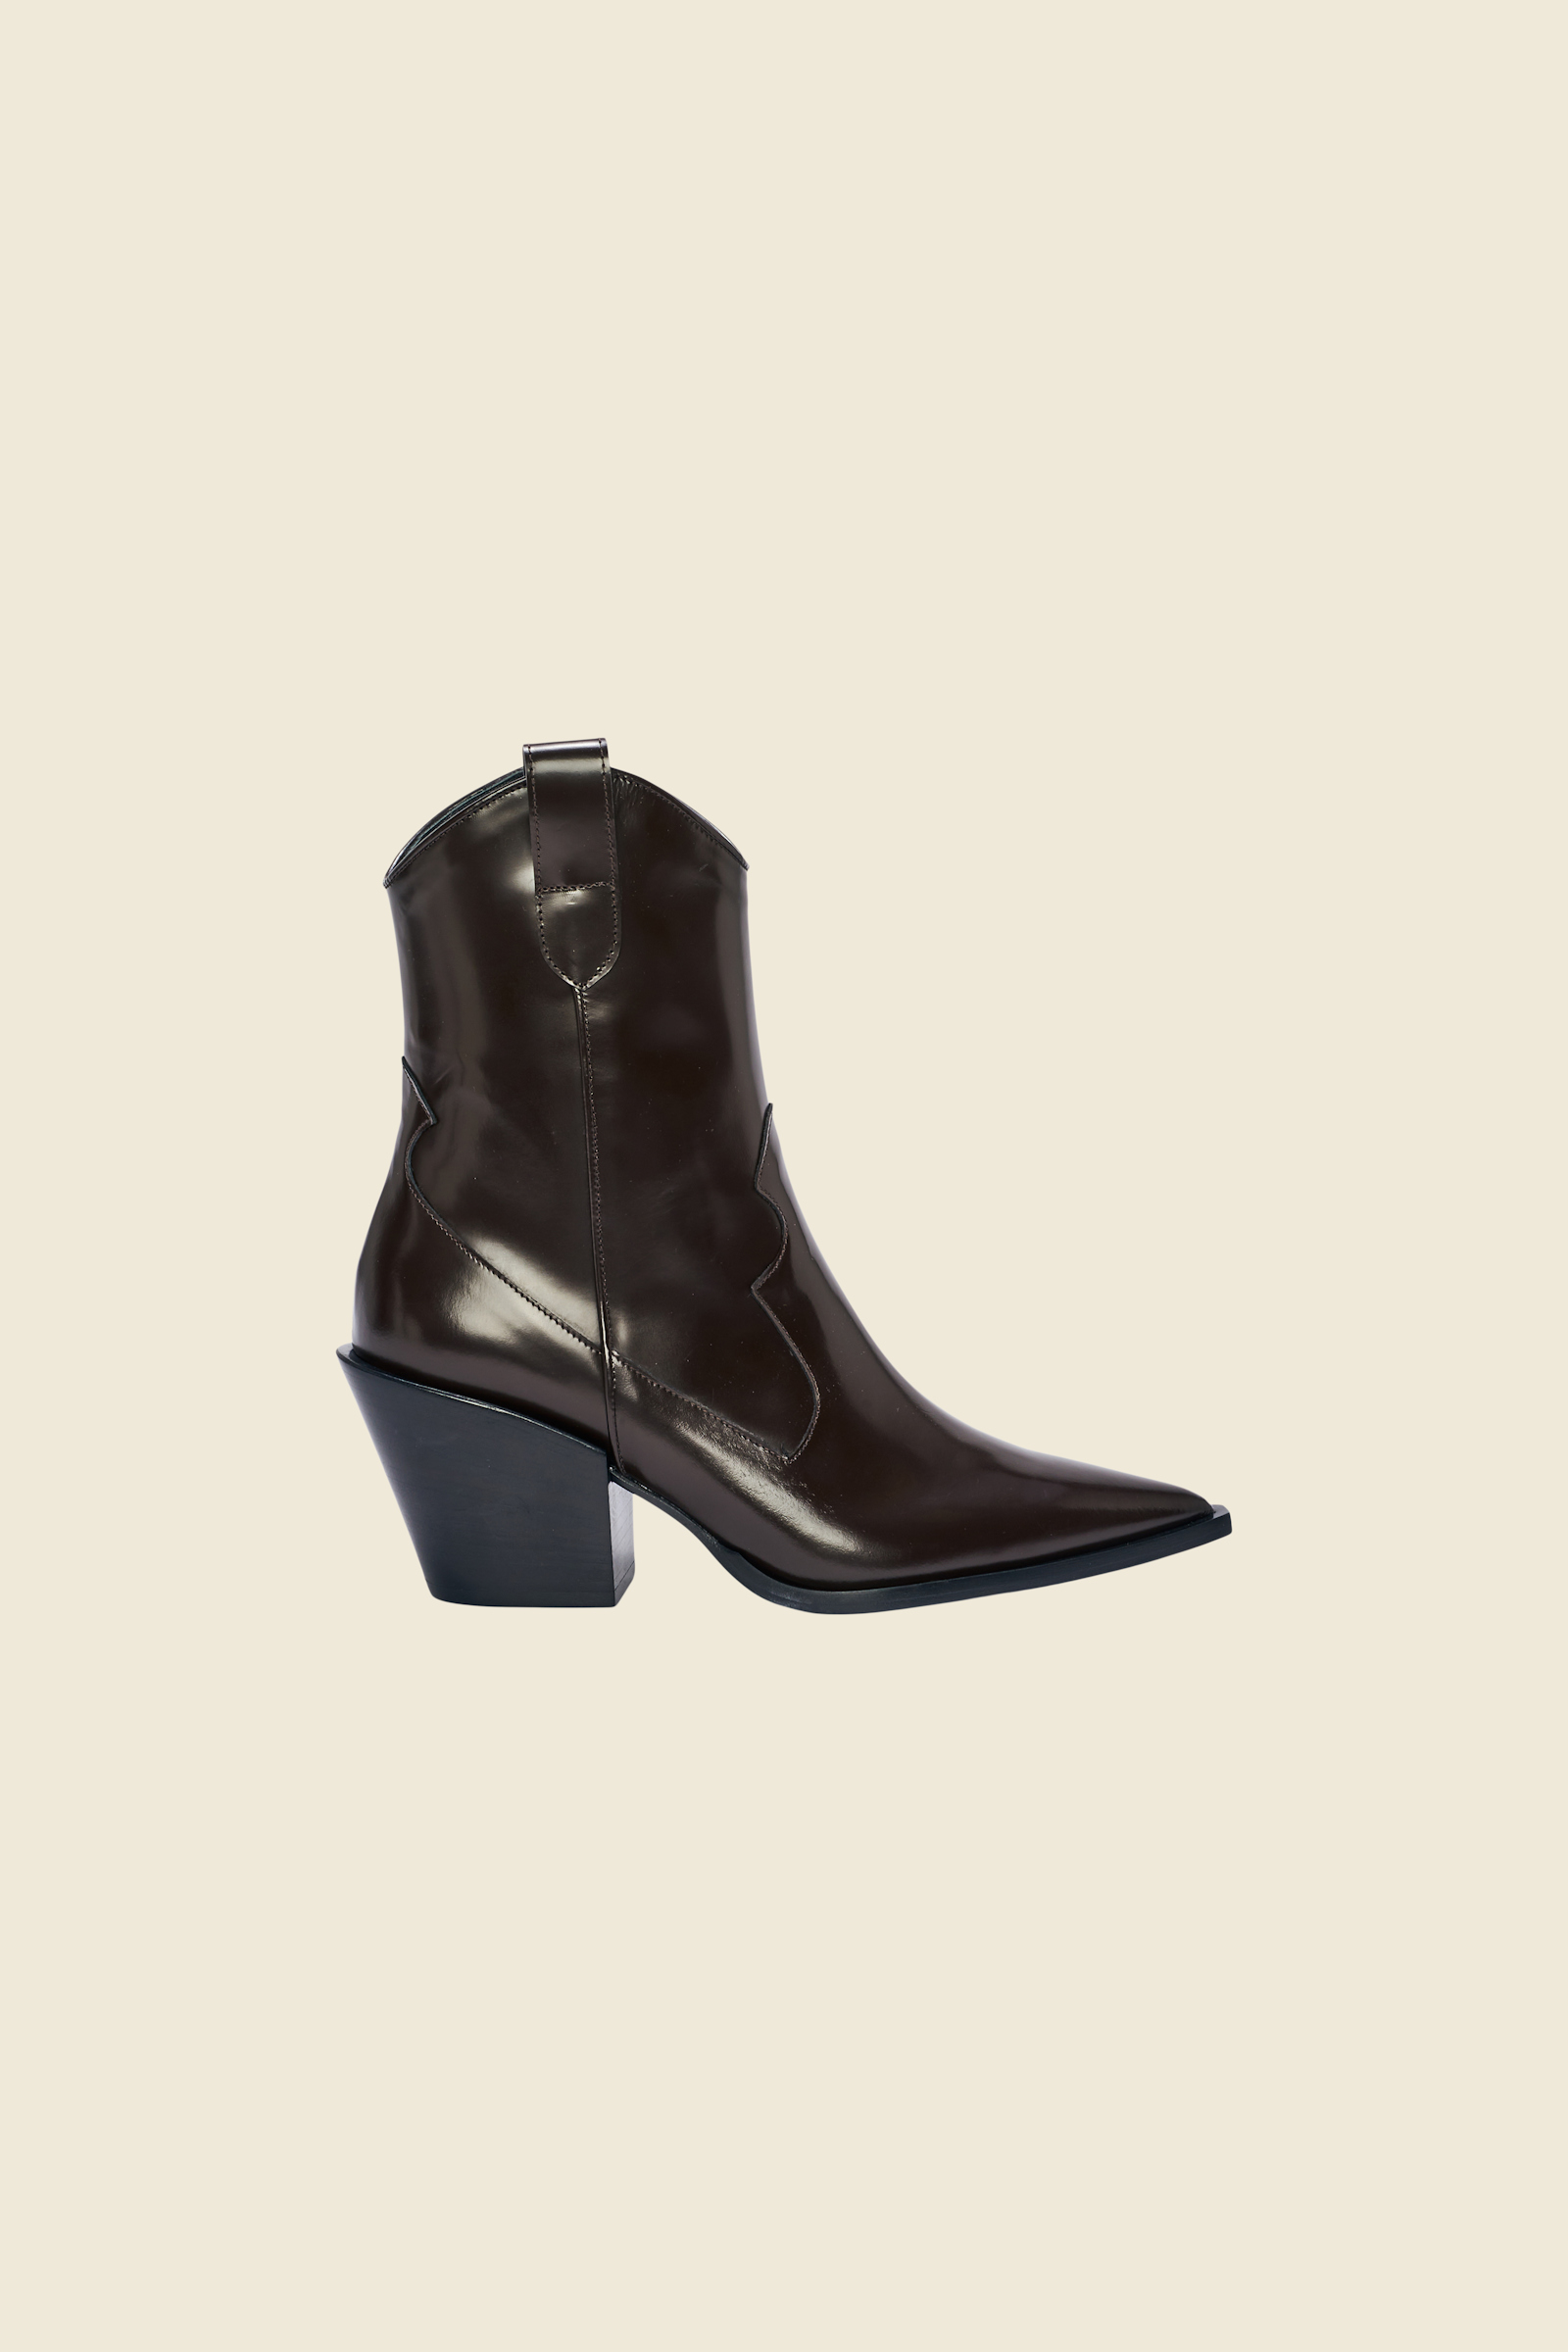 GLOSSY AMBITION short western boot